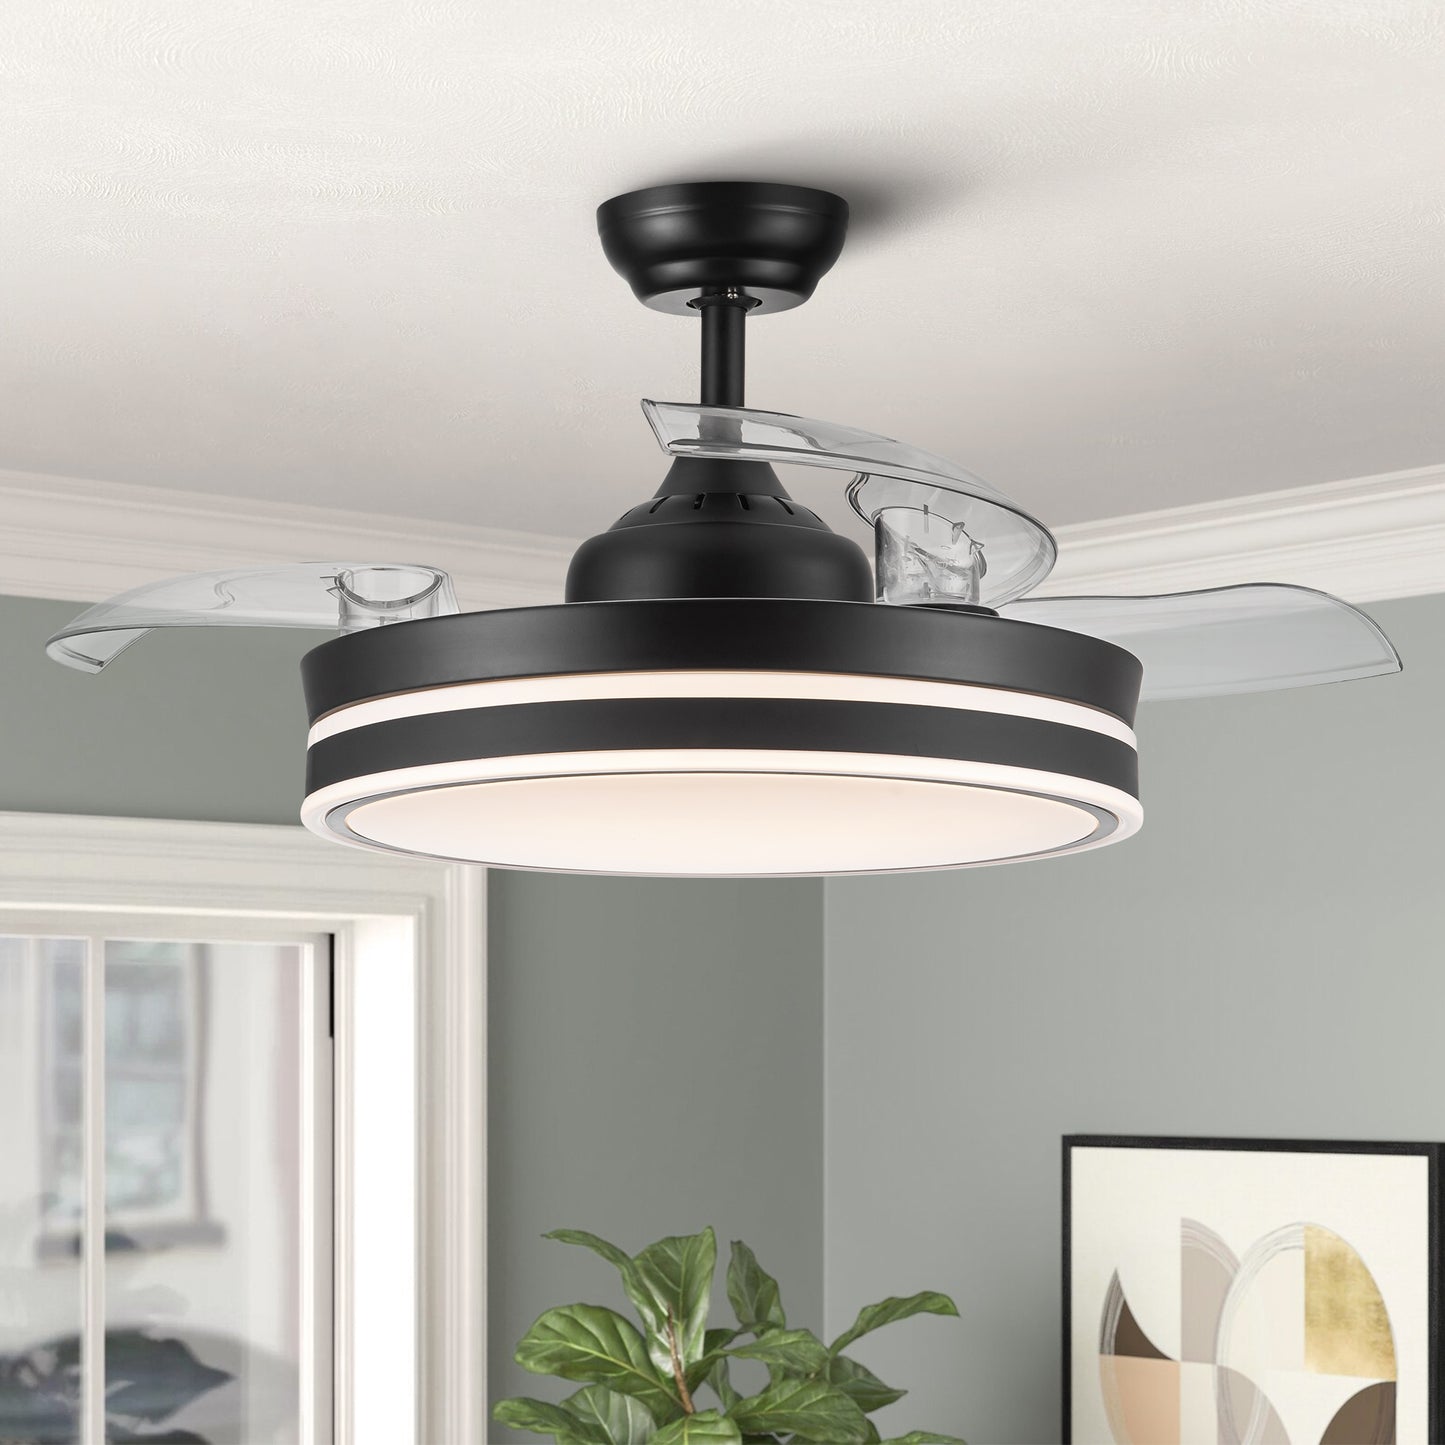 Modern Black Frame Ceiling Fan with Retractable Blades and Remote Control